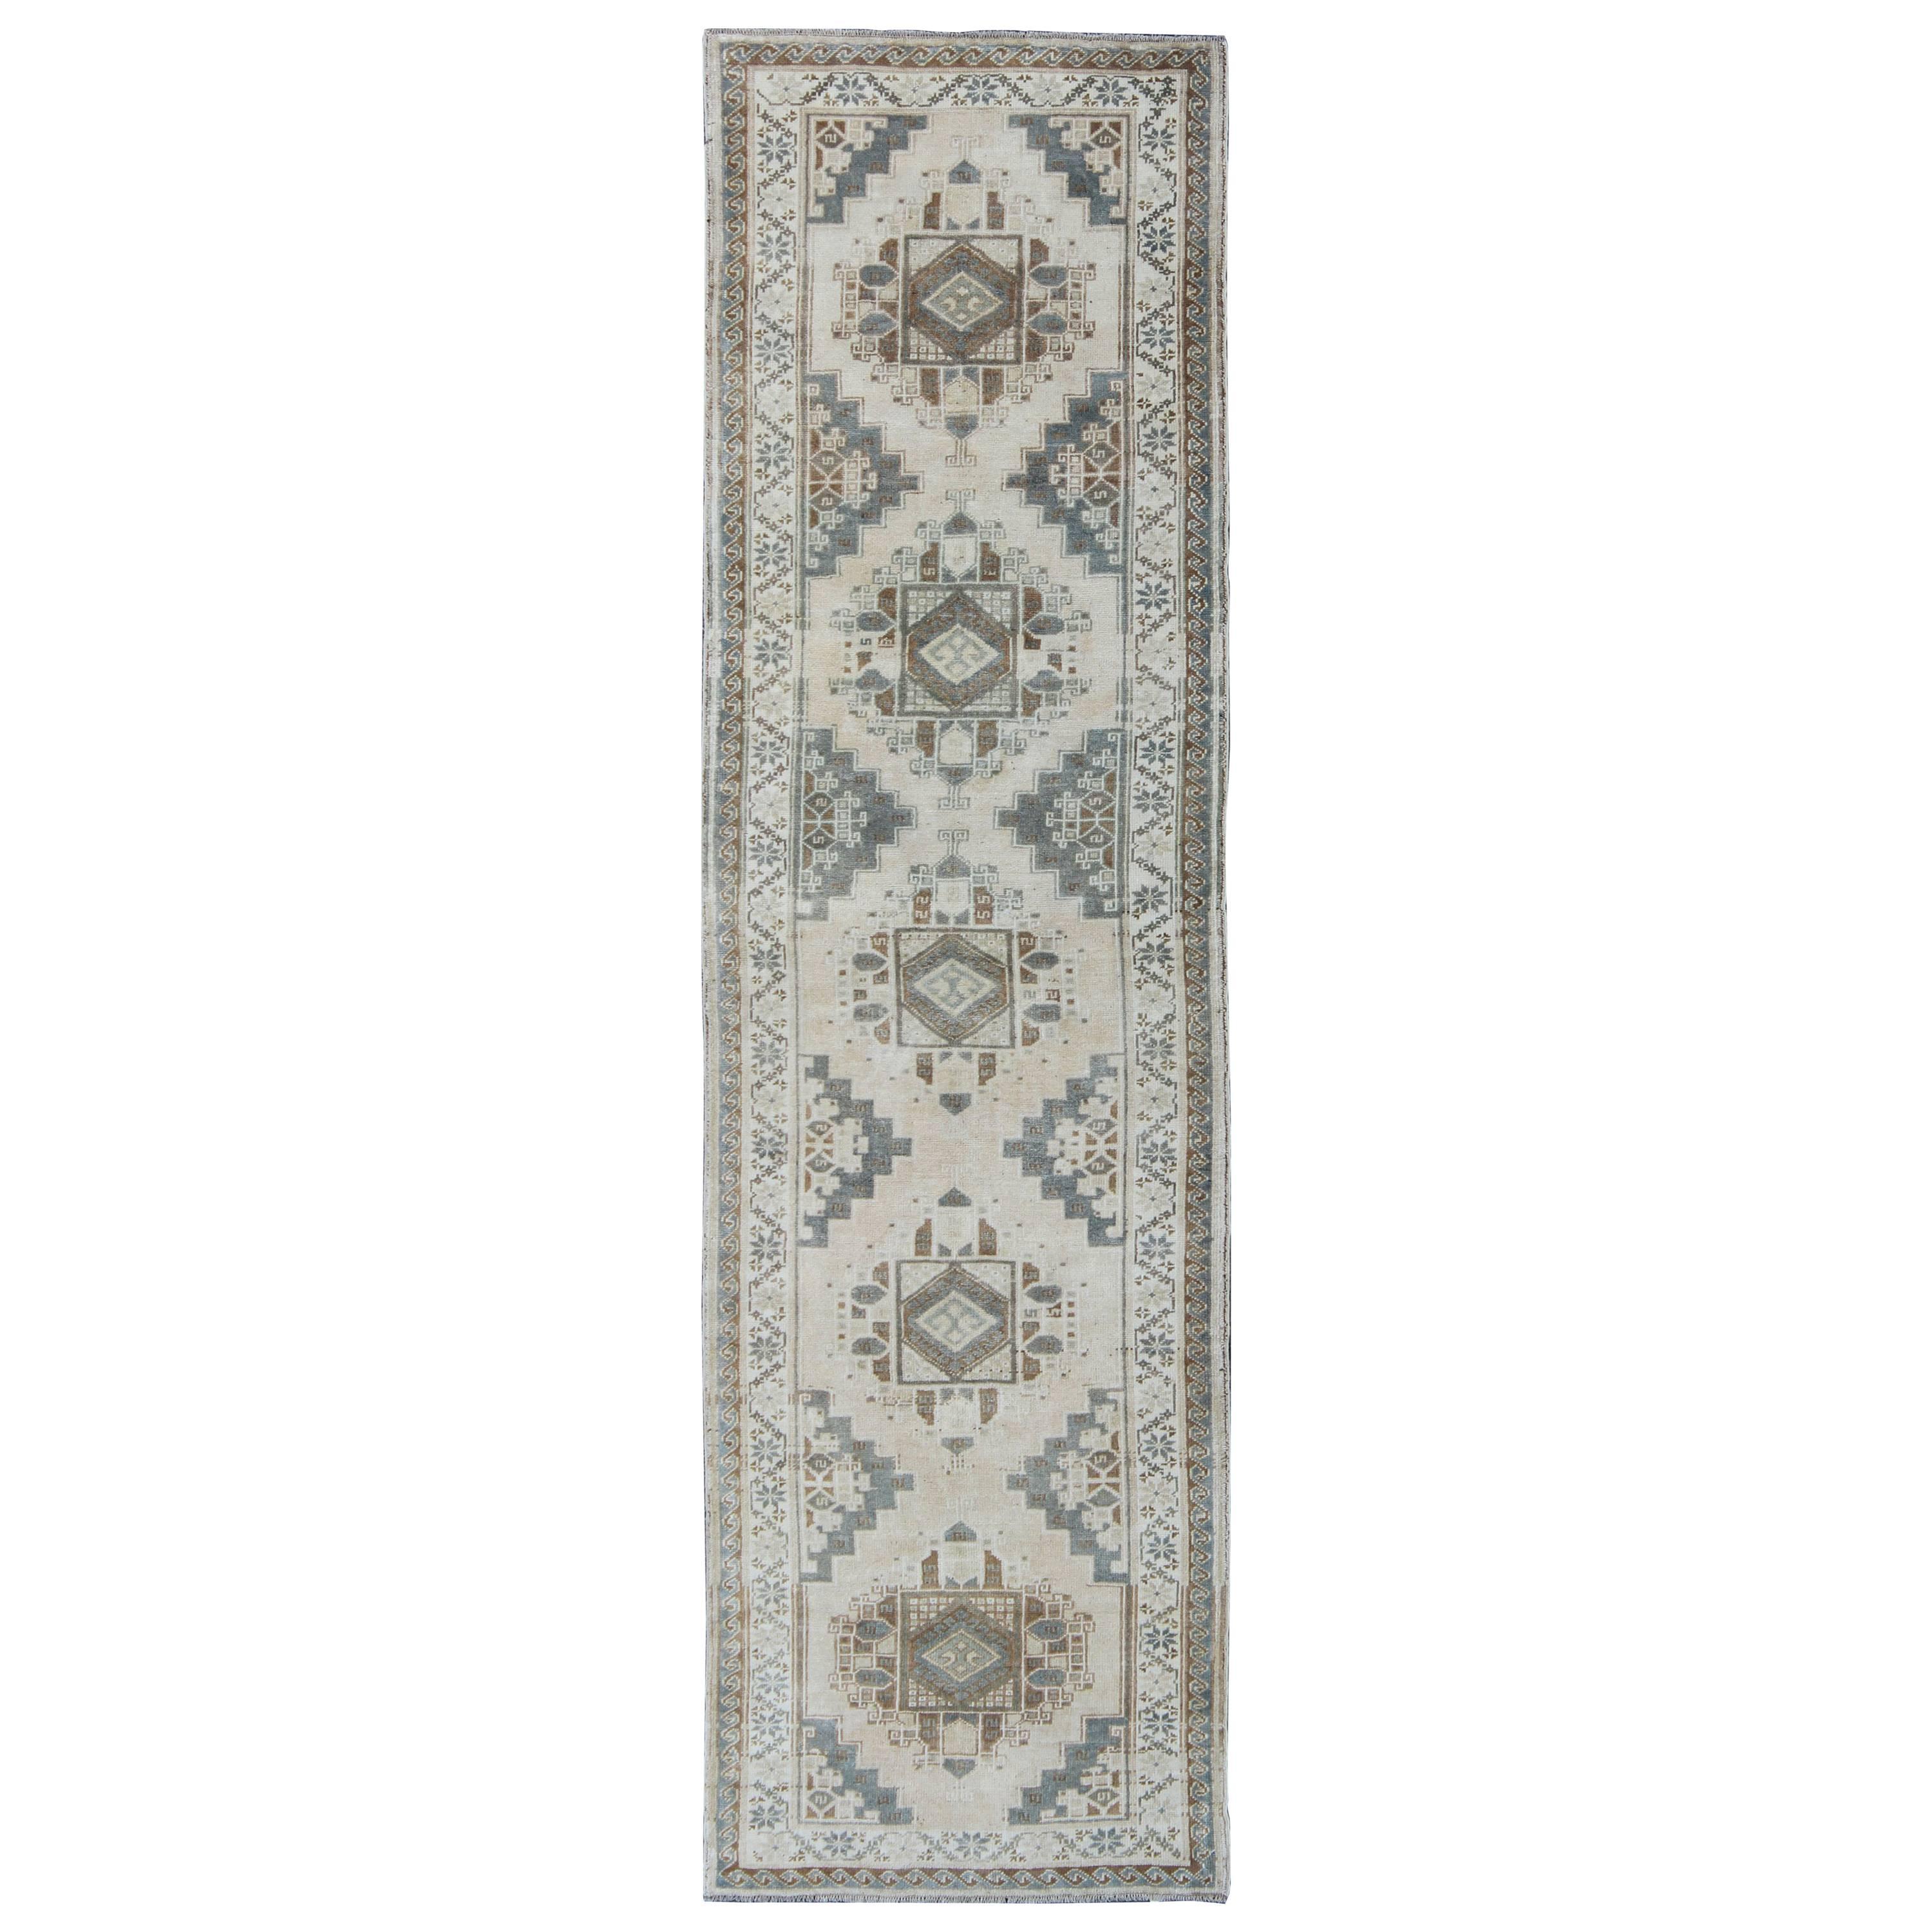 Vintage Oushak Runner with Ornate Taupe and Gray Medallions